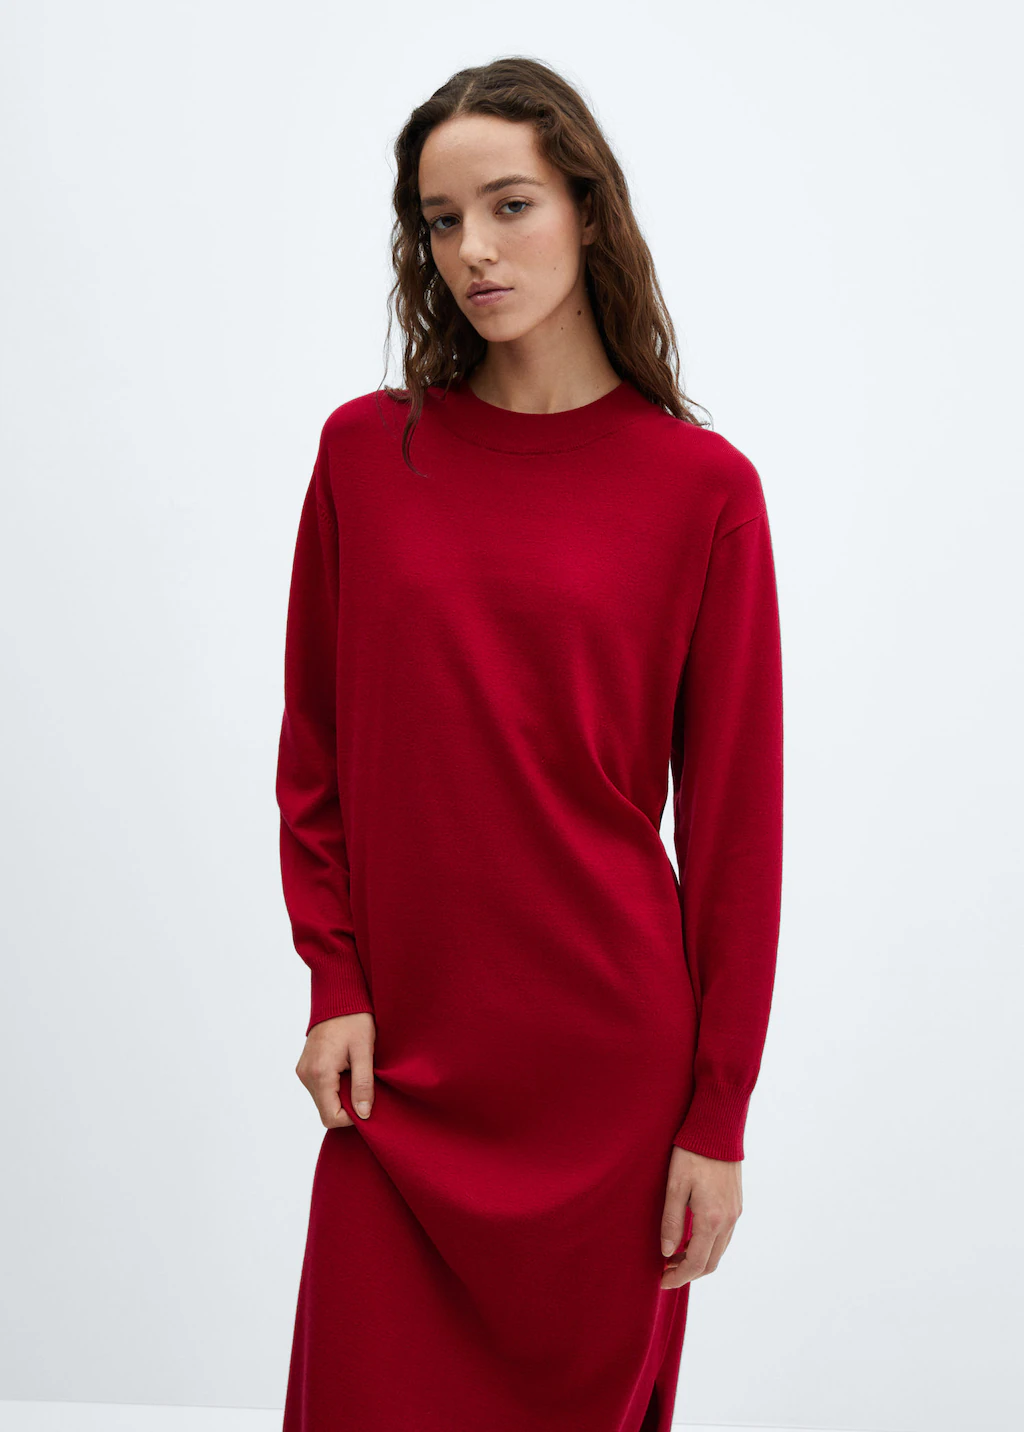 Mango red knit dress in Fine knit fabric. Straight Long design with relaxed fit, Rounded neck & Long sleeves. Side slit hem.